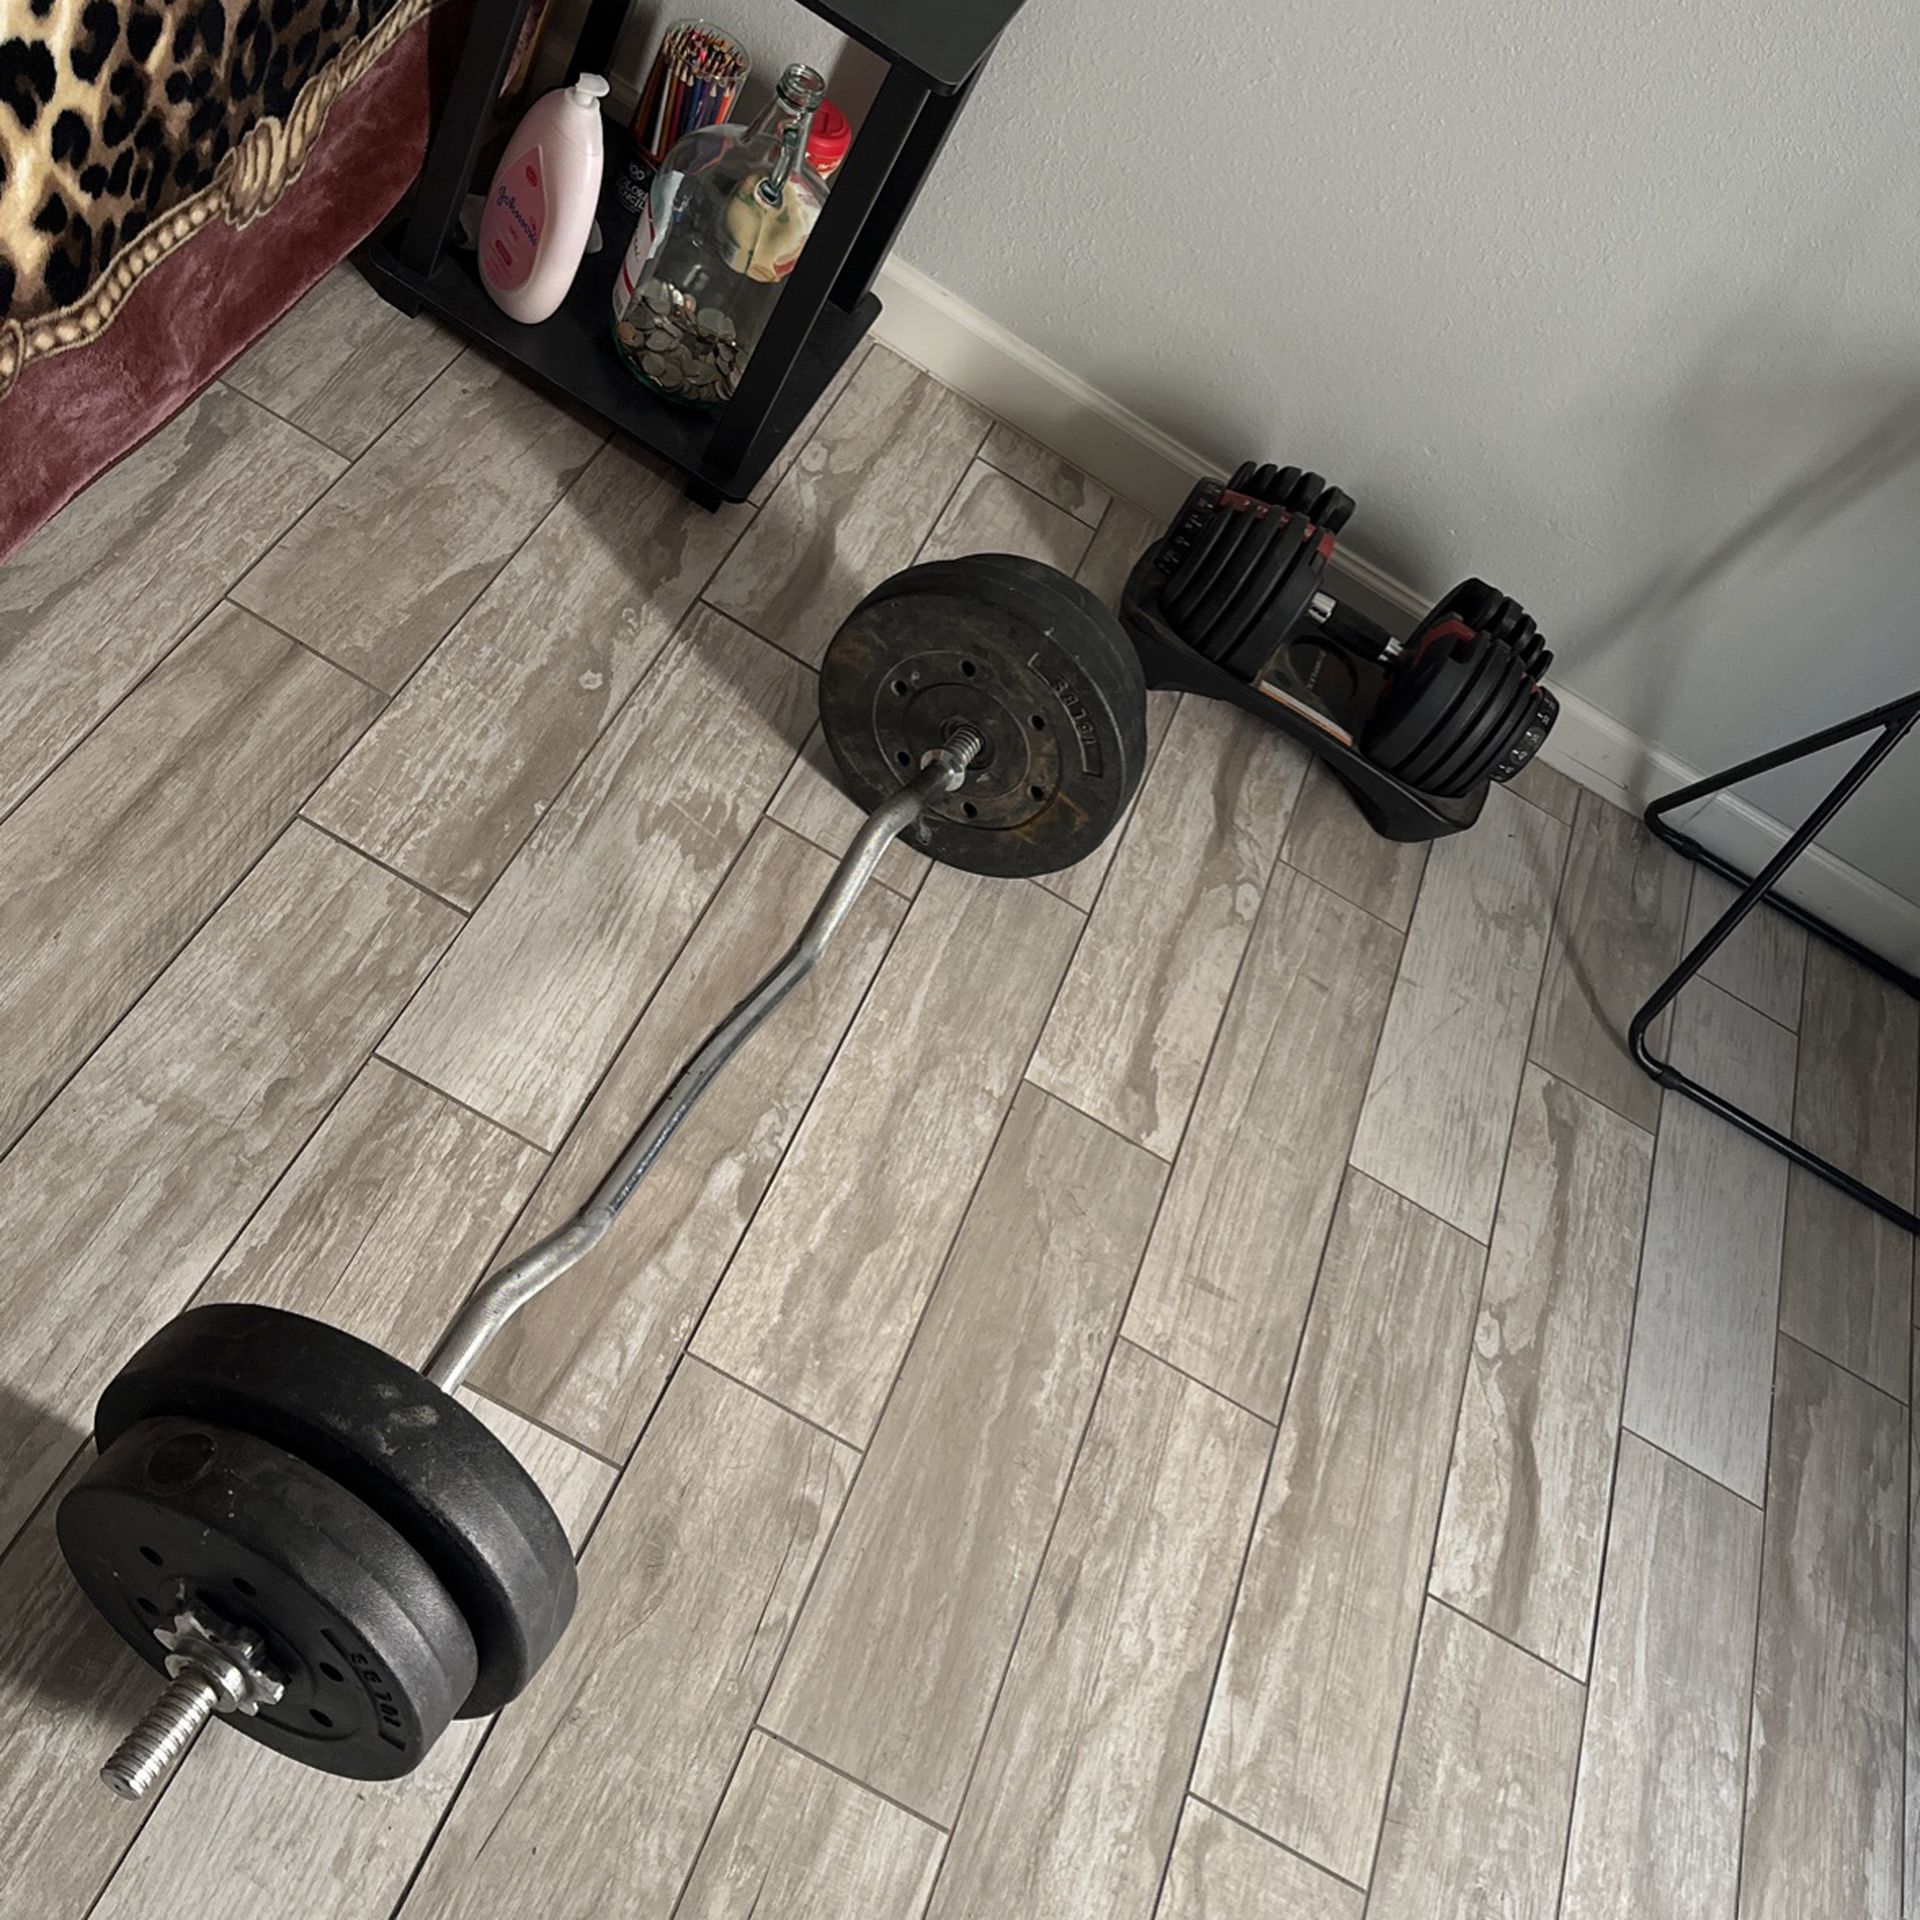 Curl Bar And Dumbell